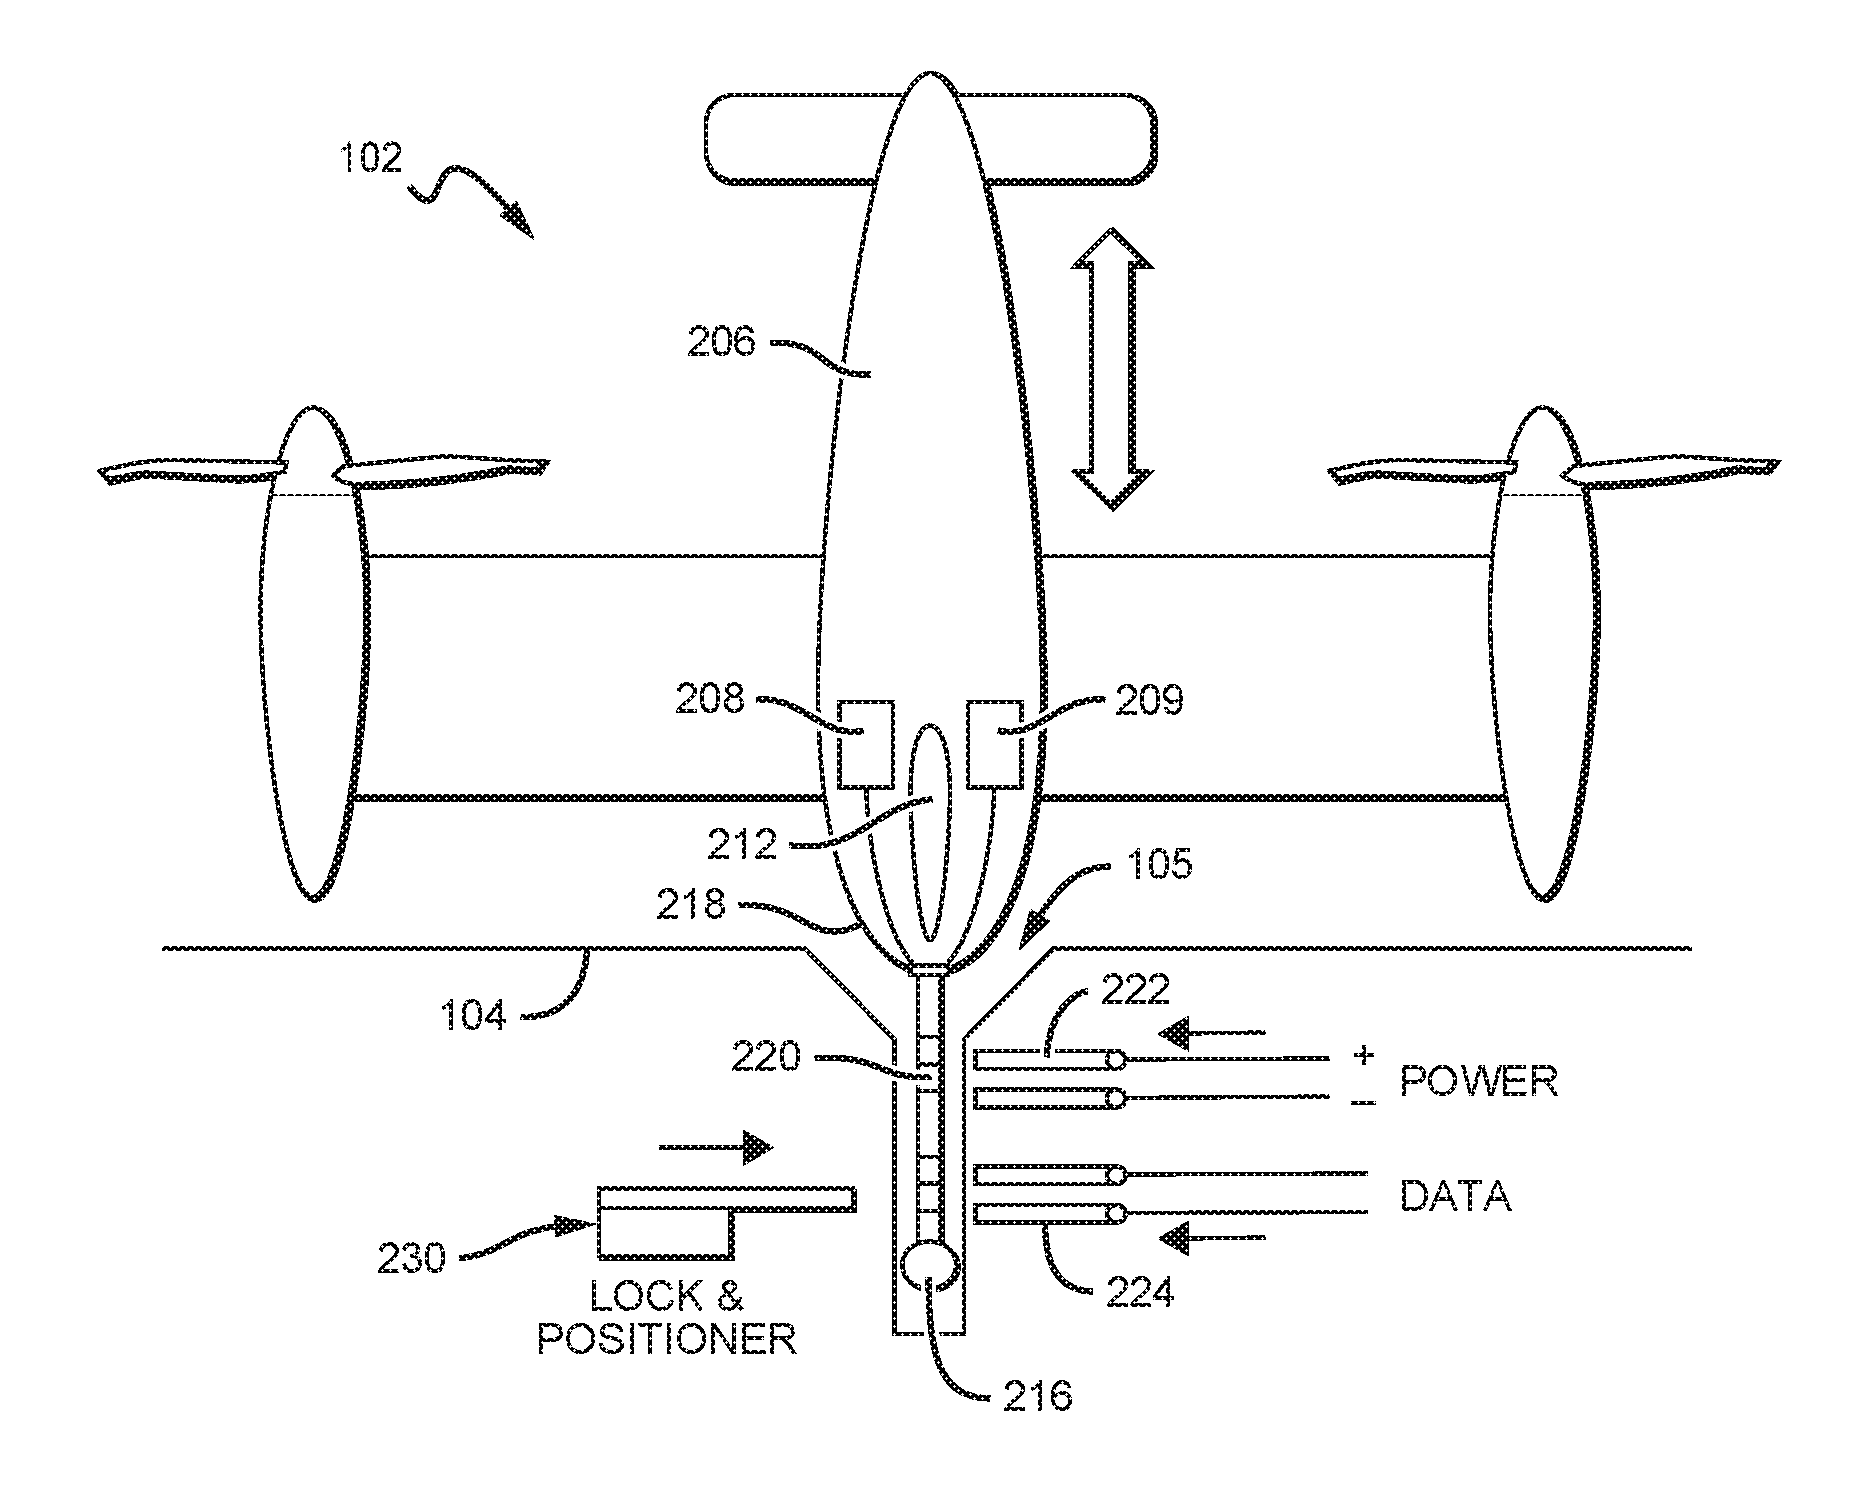 Power and communication interface for vertical take-off and landing (VTOL) unmanned aerial vehicles (UAVS)